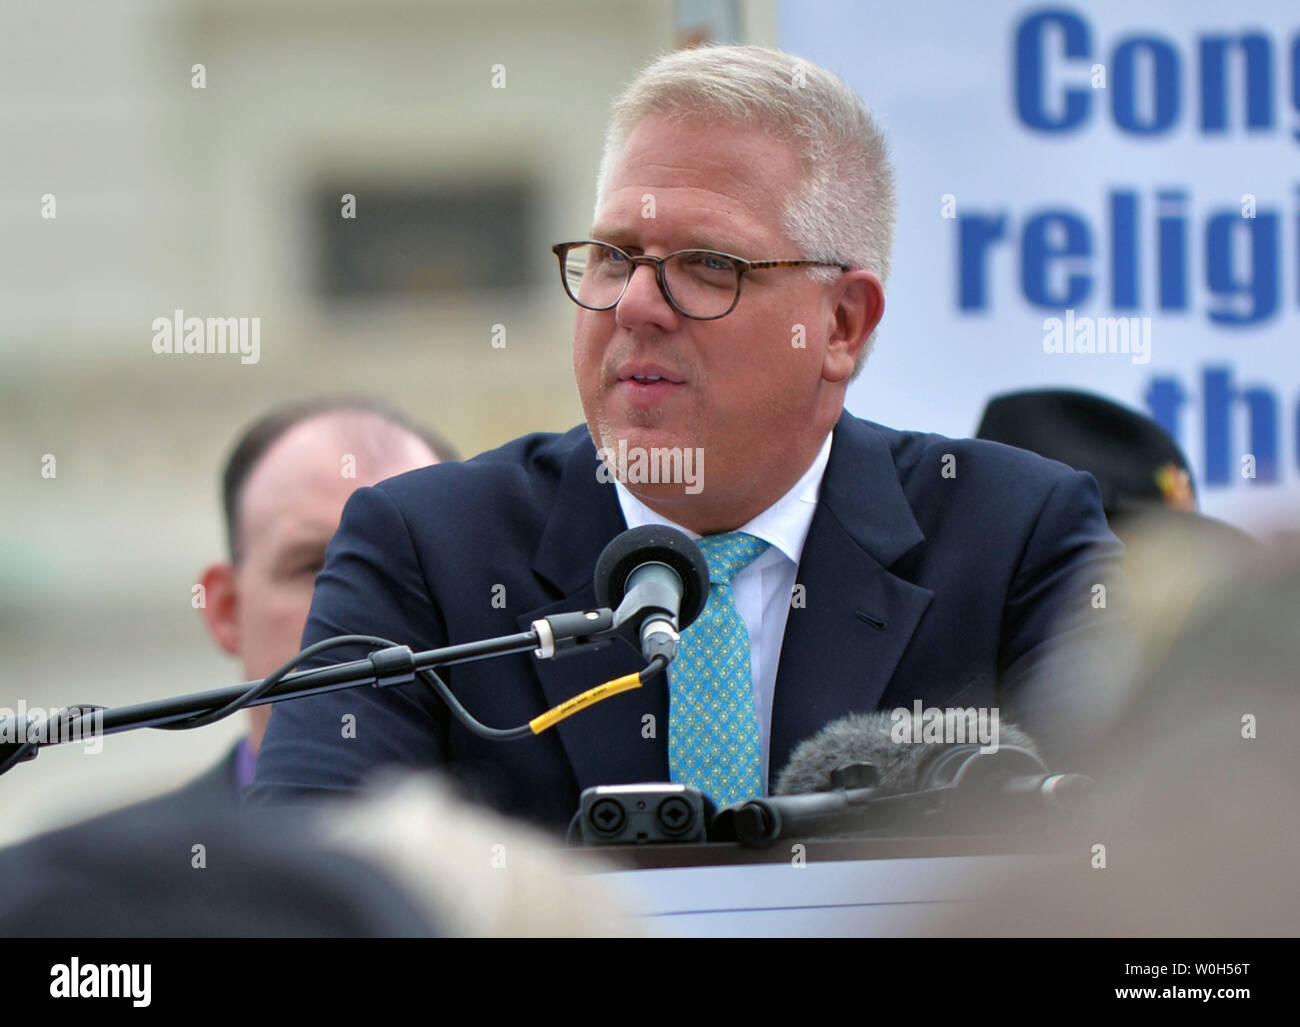 Glenn Beck, conservative television and radio host, speaks during the Tea Party Patriot Audit the IRS rally on the grounds of the U.S. Capitol on June 19, 2013 in Washington, D.C.  UPI/Kevin Dietsch Stock Photo